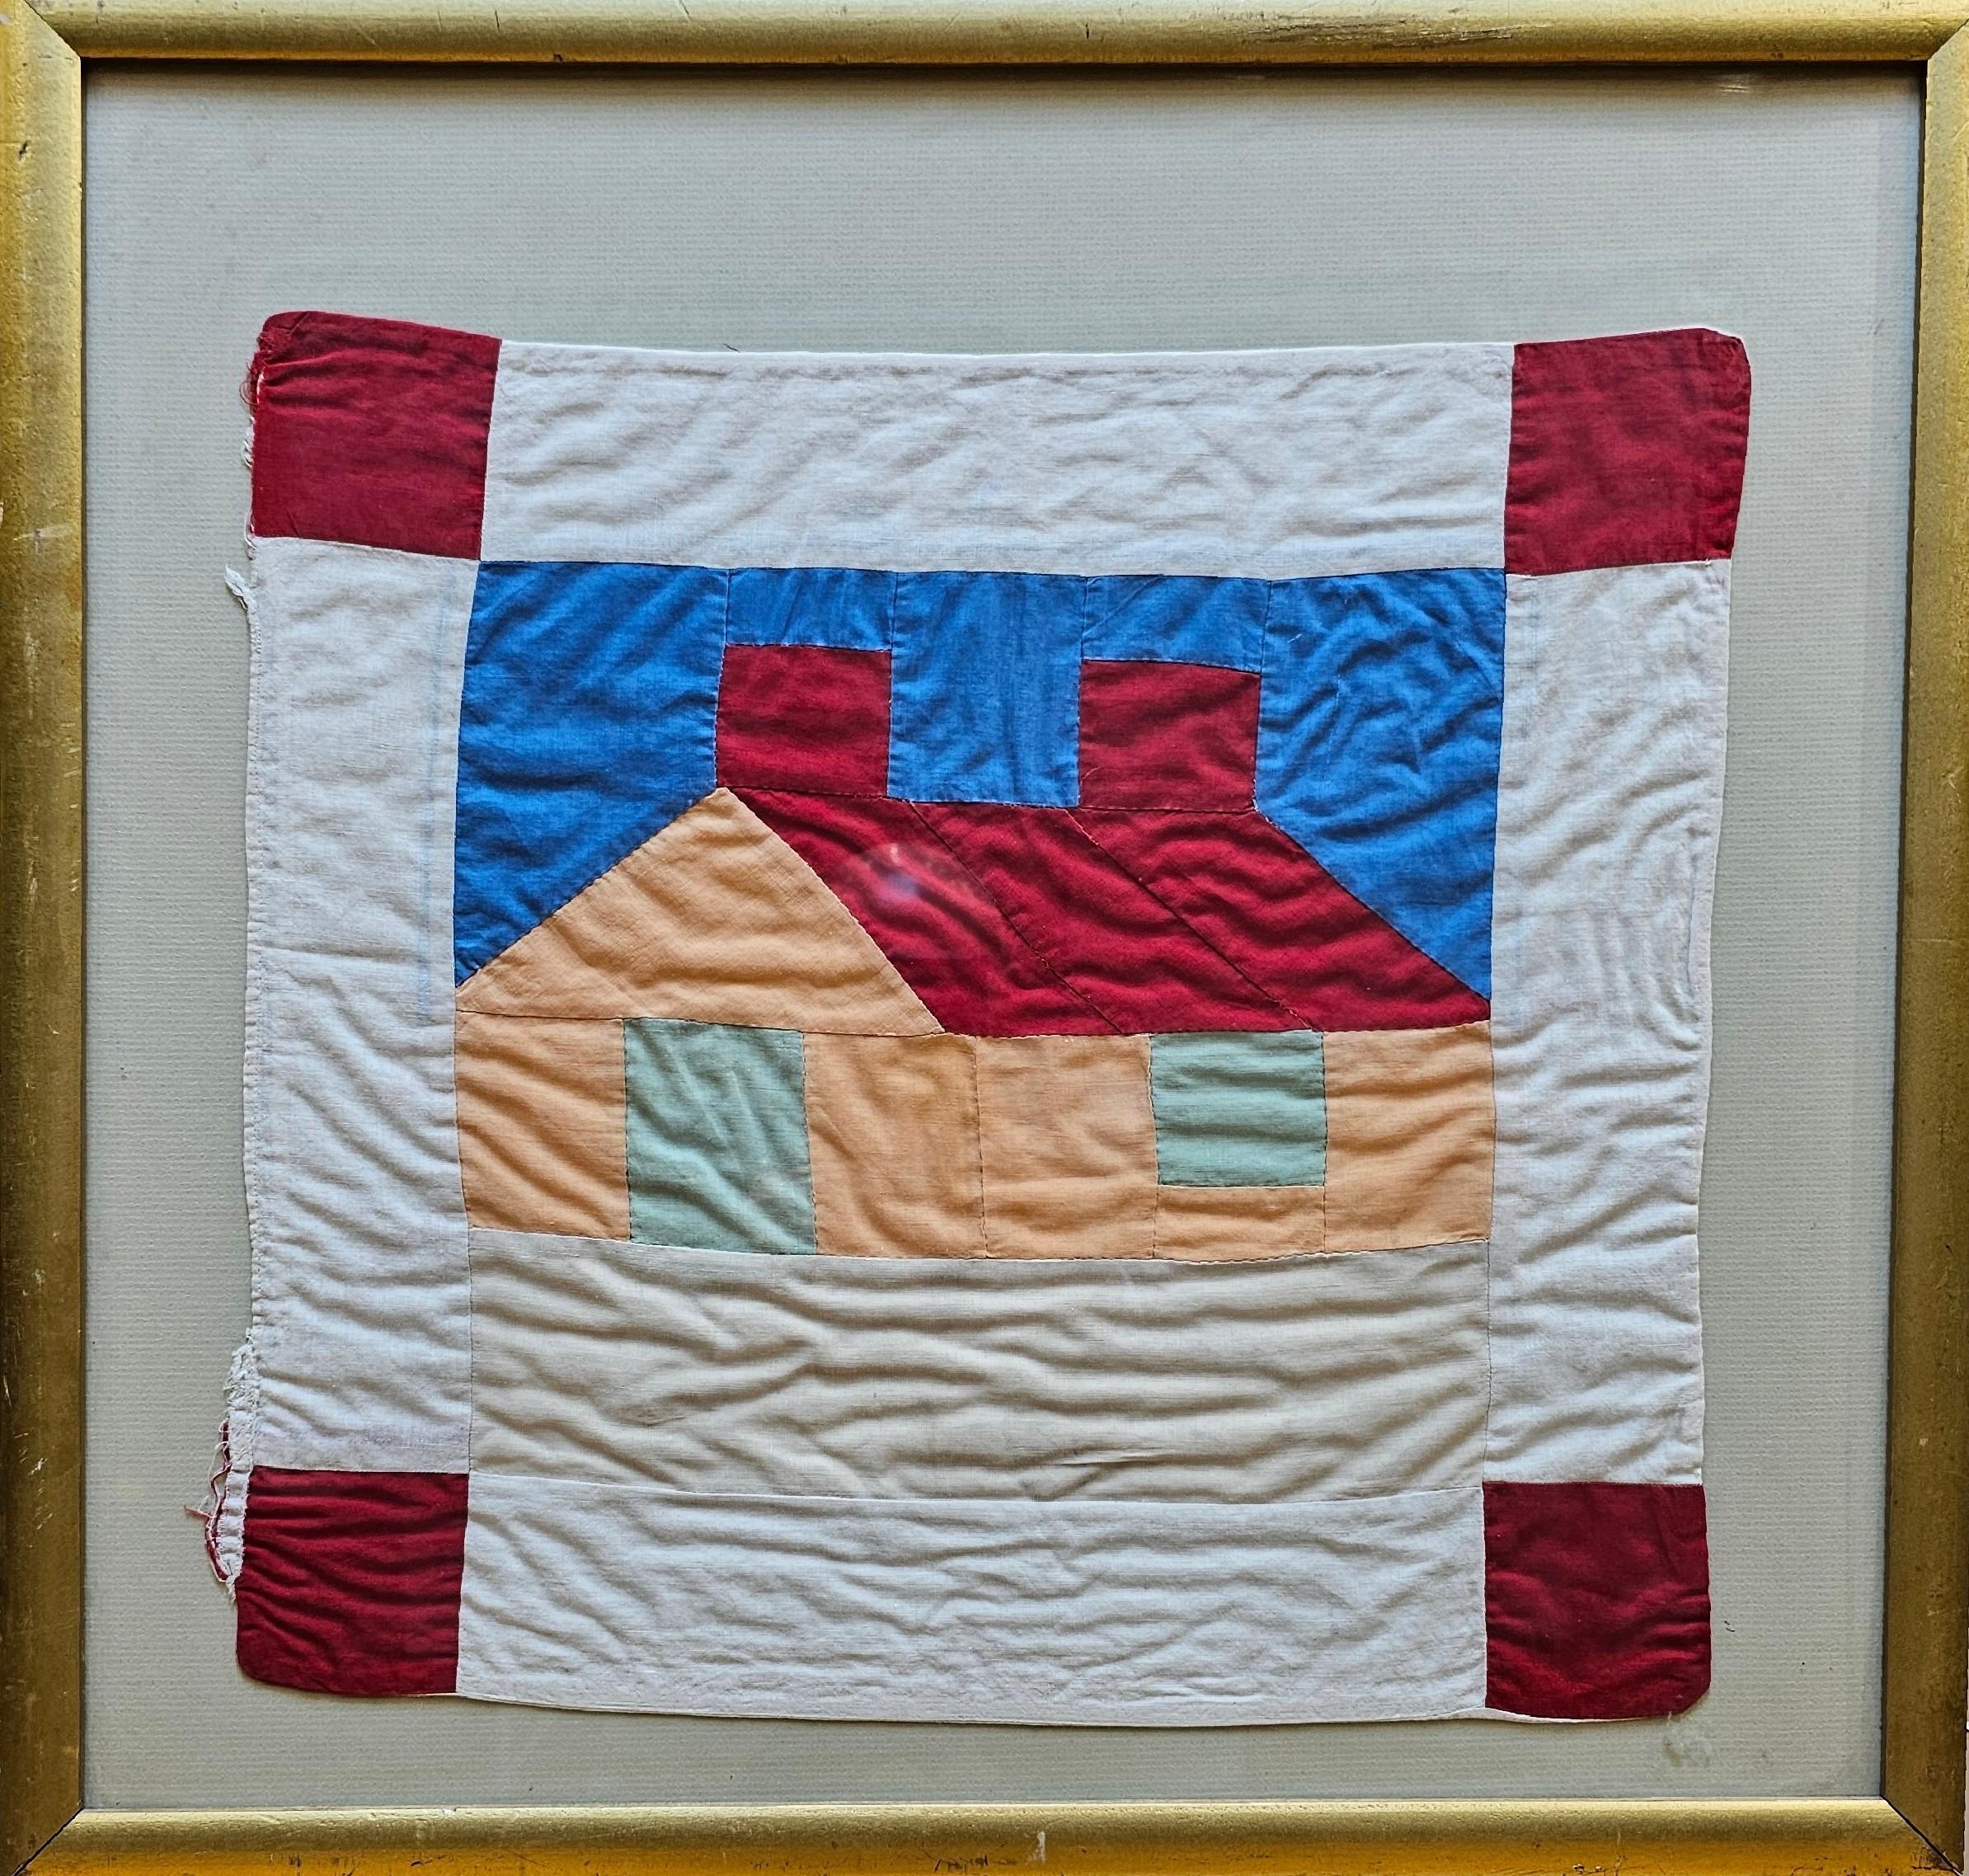 17.5” x 18.5” x. .1”    Charming vintage hand stitched small quilt depicting a house in red, peach, green blue, and ivory from the mid 1900s.  The quilt is beautifully mounted and is in a glassed wood frame.   

Dimensions:  Frame: 25” x 24” x .75”,